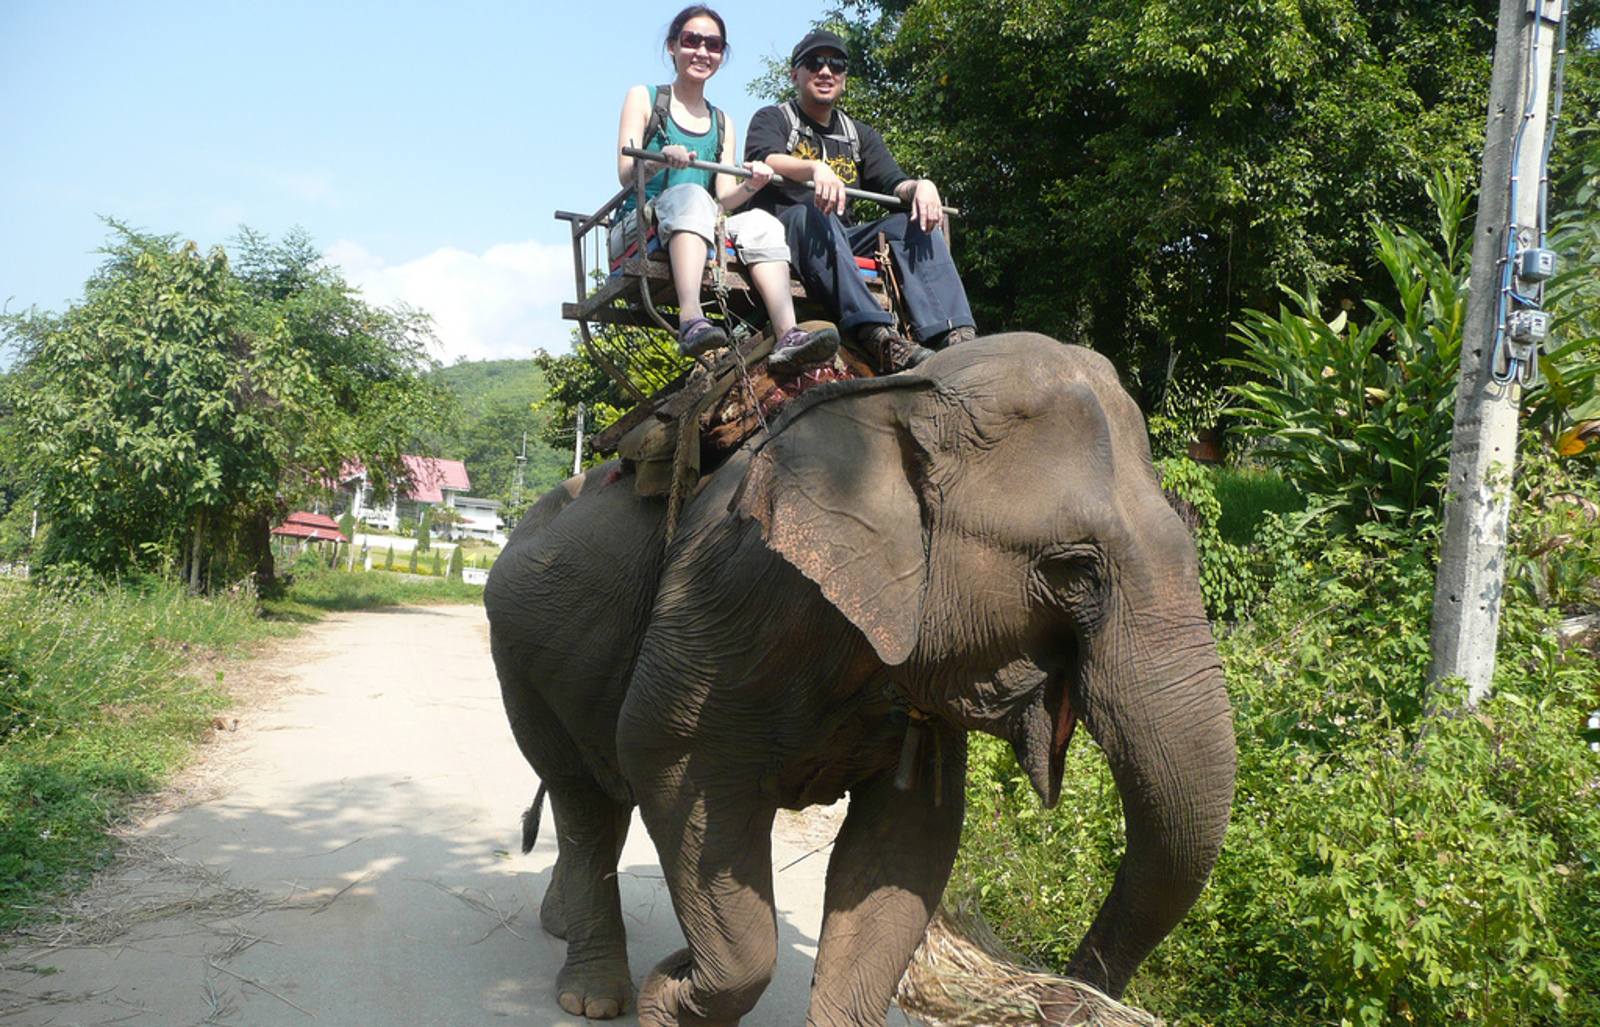 Think Elephant Rides are Cute? Here's Why You Should Reconsider